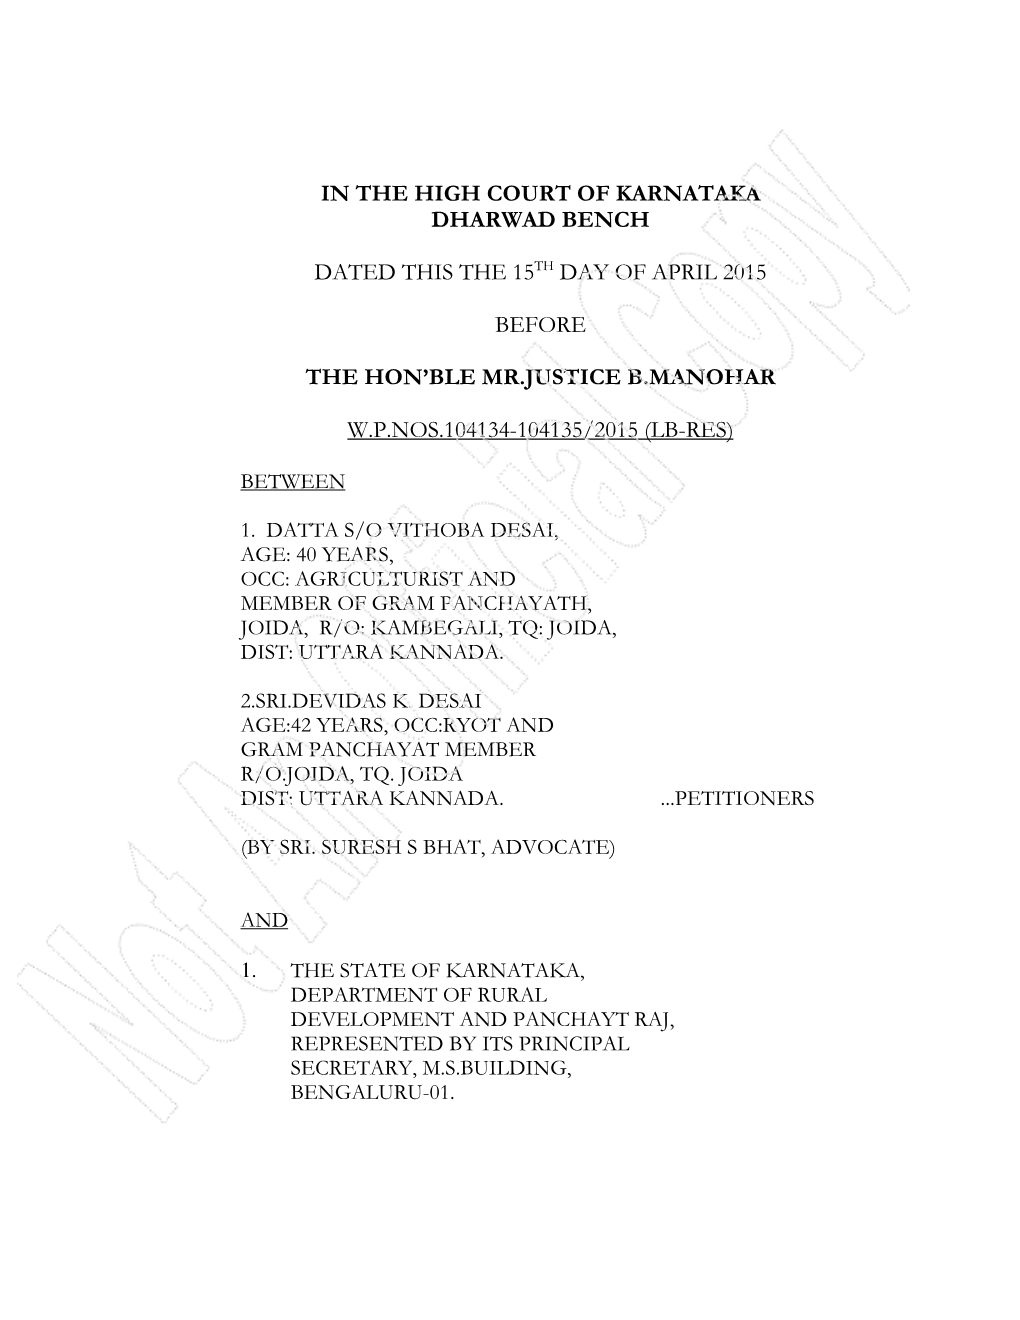 In the High Court of Karnataka Dharwad Bench Dated This the 15Th Day of April 2015 Before the Hon'ble Mr.Justice B.Manohar